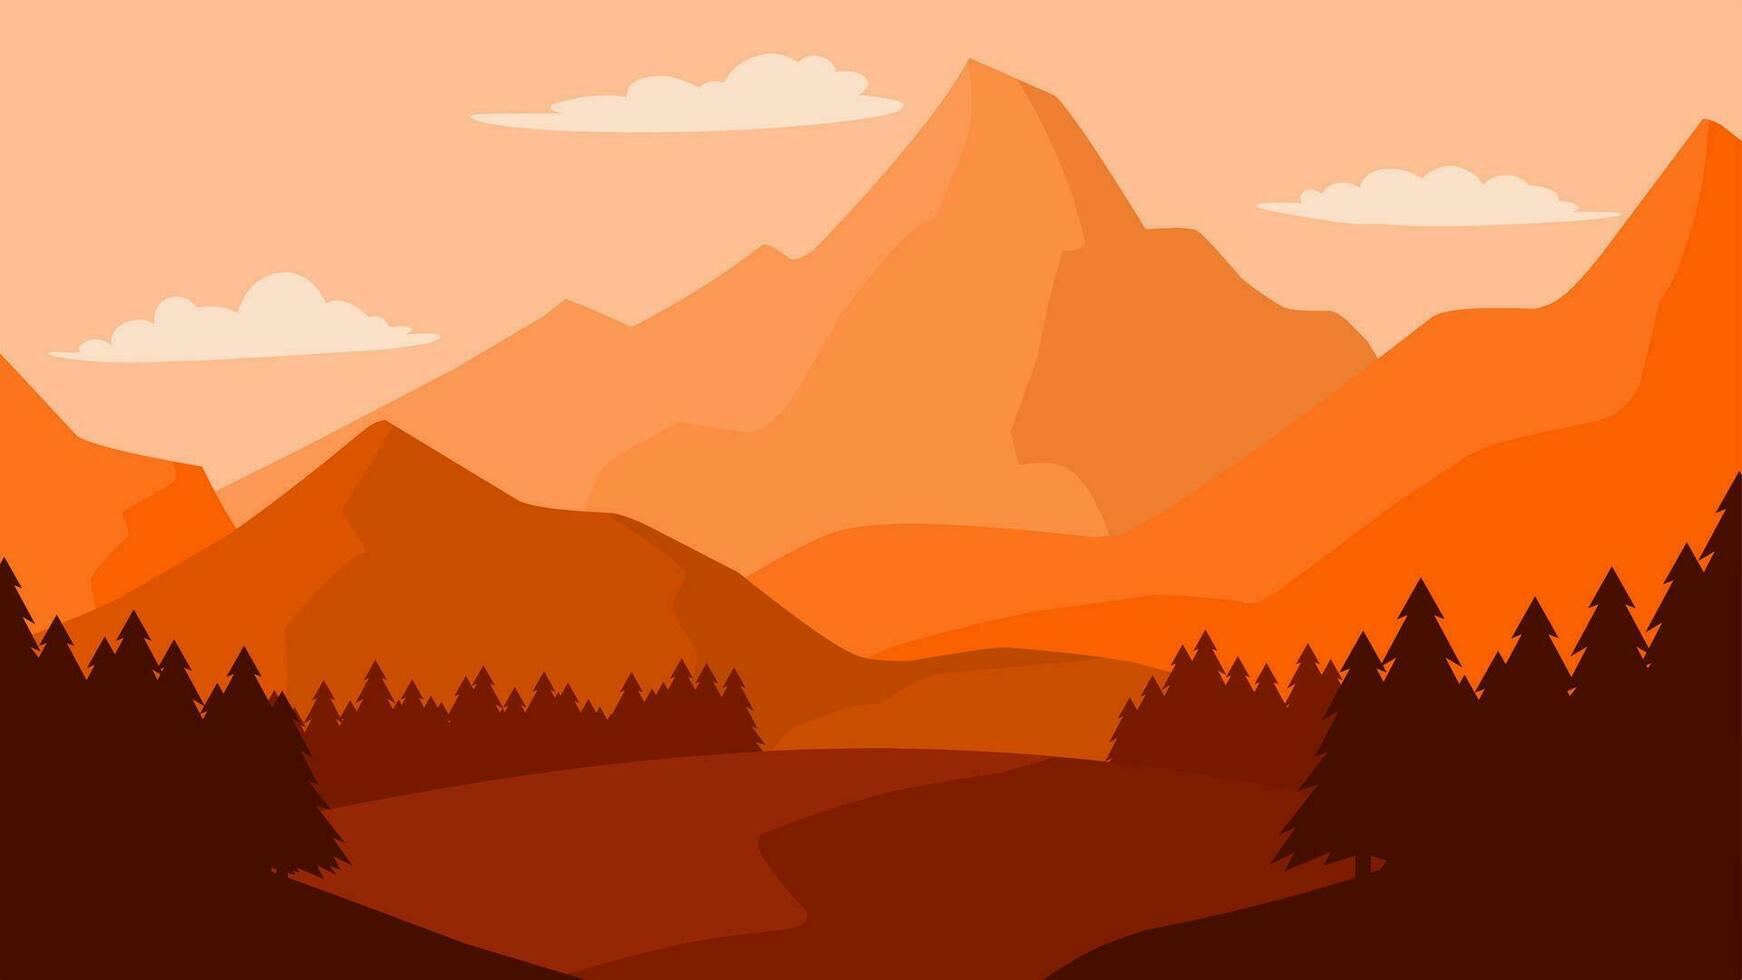 Mountain landscape vector illustration. Orange mountains ridge with pine forest. Mountain range landscape for background, wallpaper, display or landing page. Vector flat style panorama illustration